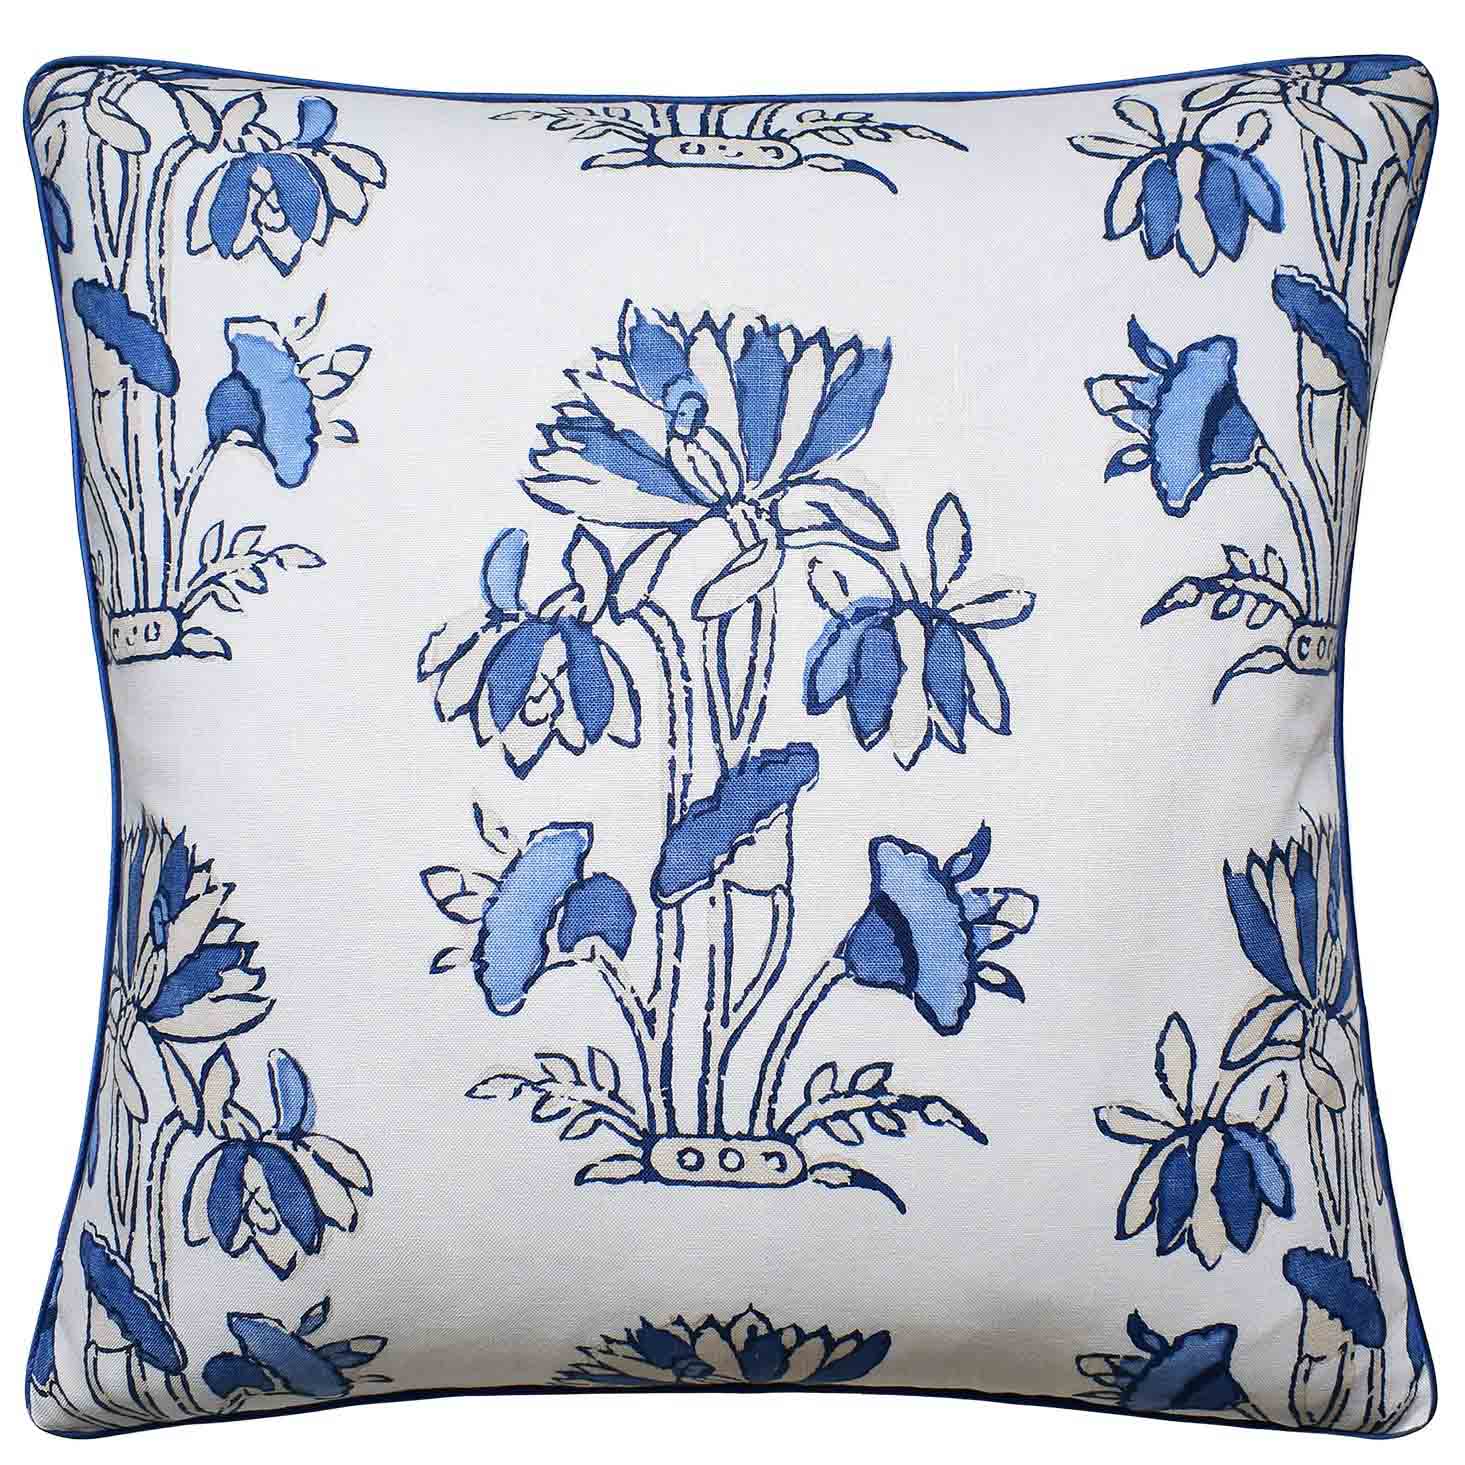 Blue and White Lily Pillow-$358.00